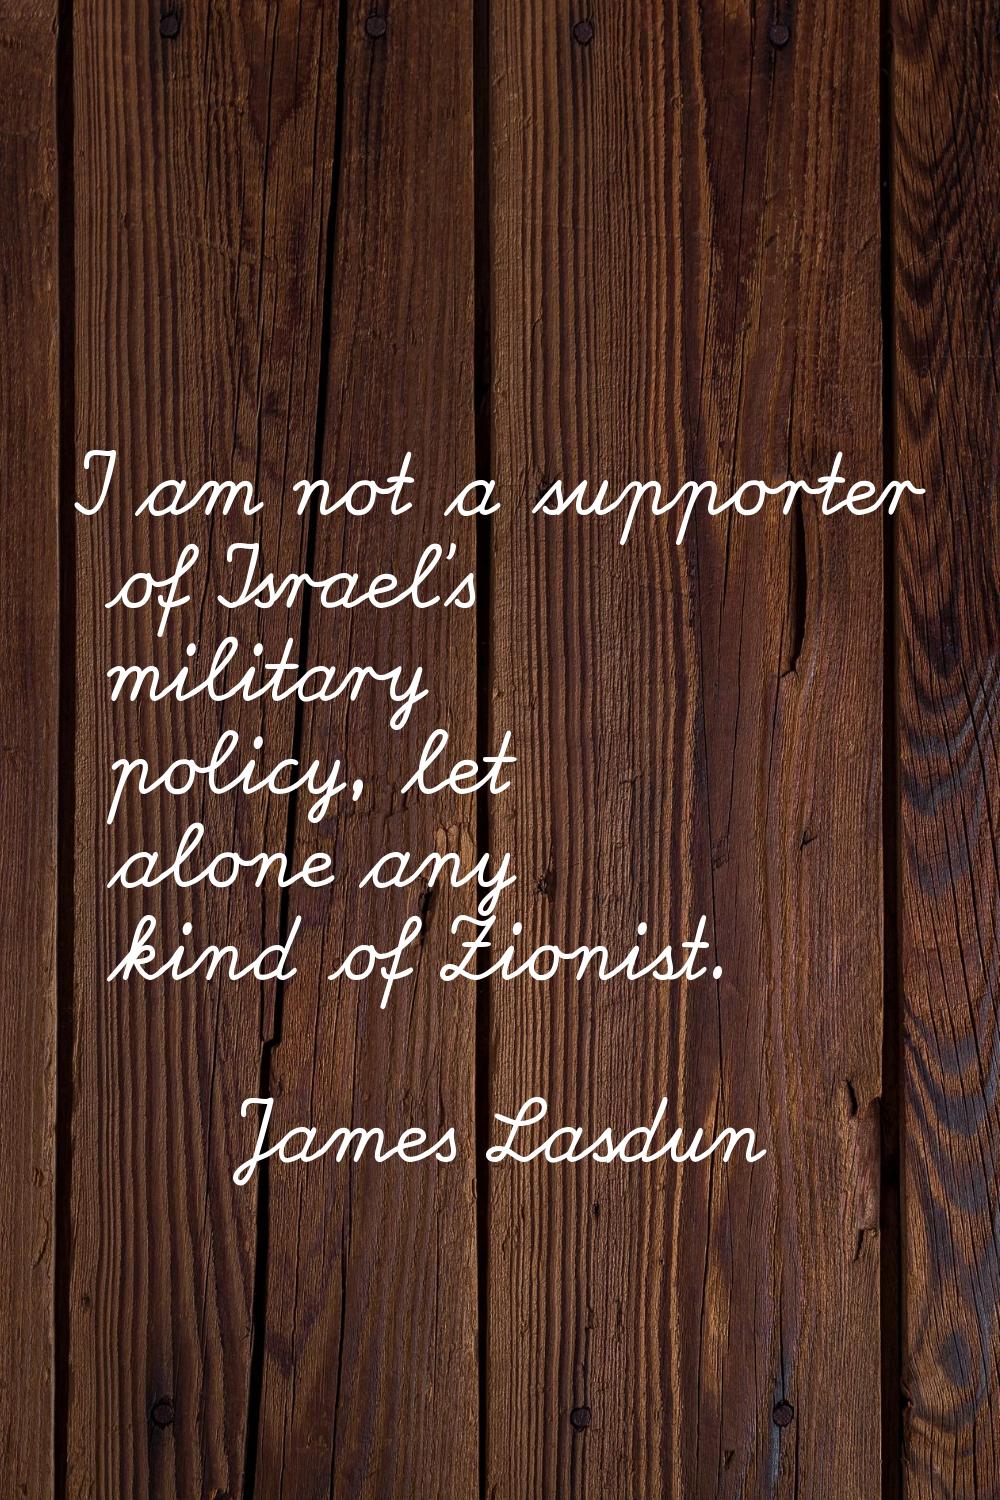 I am not a supporter of Israel's military policy, let alone any kind of Zionist.